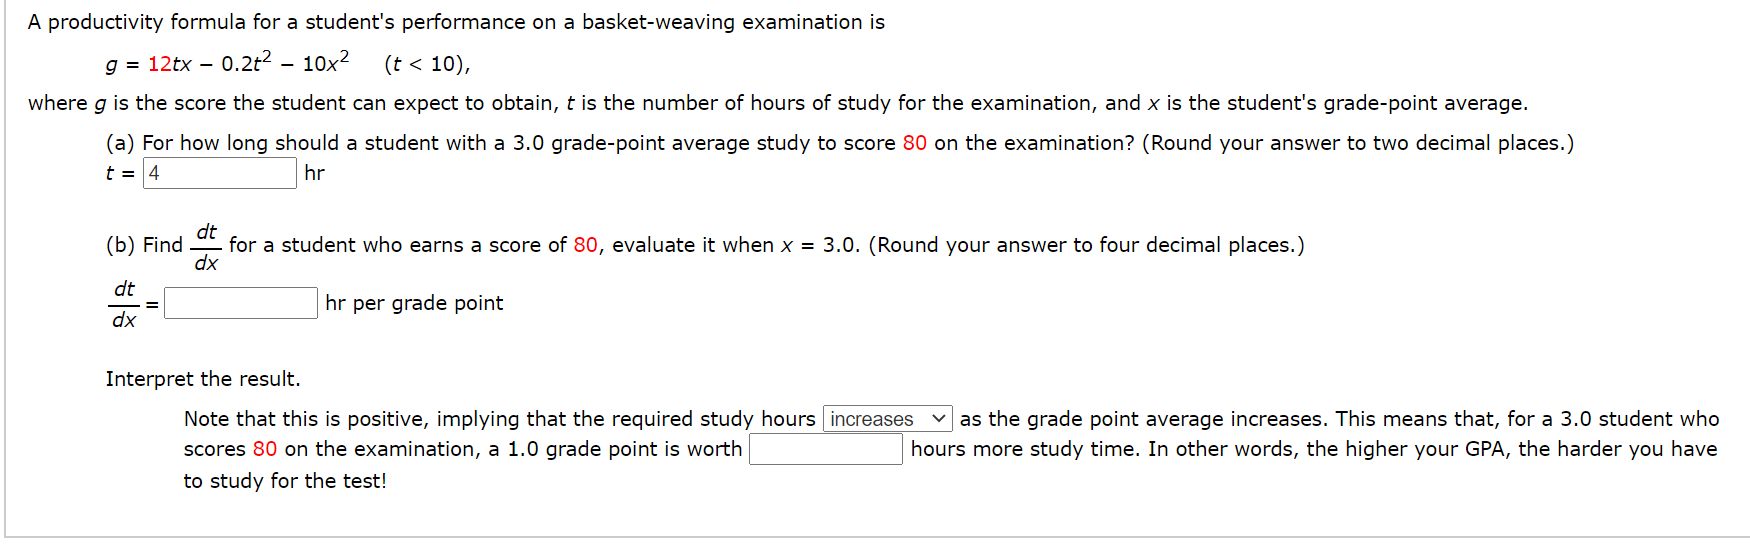 A productivity formula for a student's performance on a basket-weaving examination is
g = 12tx – 0.2t² – 10x2
(t < 10),
where g is the score the student can expect to obtain, t is the number of hours of study for the examination, and x is the student's grade-point average.
(a) For how long should a student with a 3.0 grade-point average study to score 80 on the examination? (Round your answer to two decimal places.)
t = 4
hr
dt
- for a student who earns a score of 80, evaluate it when x = 3.0. (Round your answer to four decimal places.)
dx
(b) Find
dt
hr per grade point
%3D
dx
Interpret the result.
Note that this is positive, implying that the required study hours increases
as the grade point average increases. This means that, for a 3.0 student who
scores 80 on the examination, a 1.0 grade point is worth
hours more study time. In other words, the higher your GPA, the harder you have
to study for the test!
